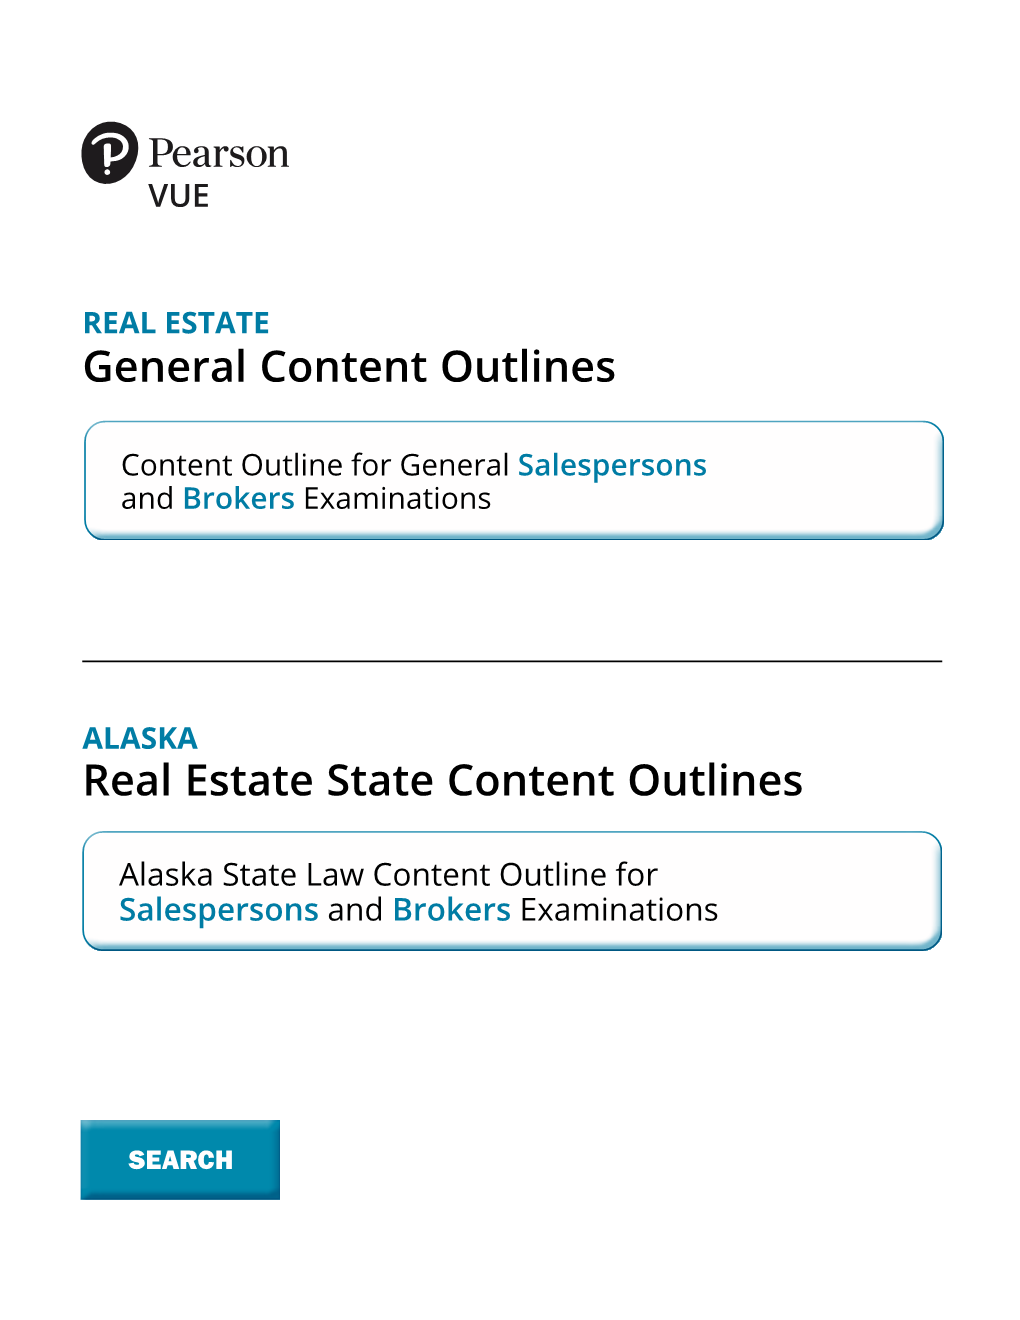 REAL ESTATE General Content Outlines